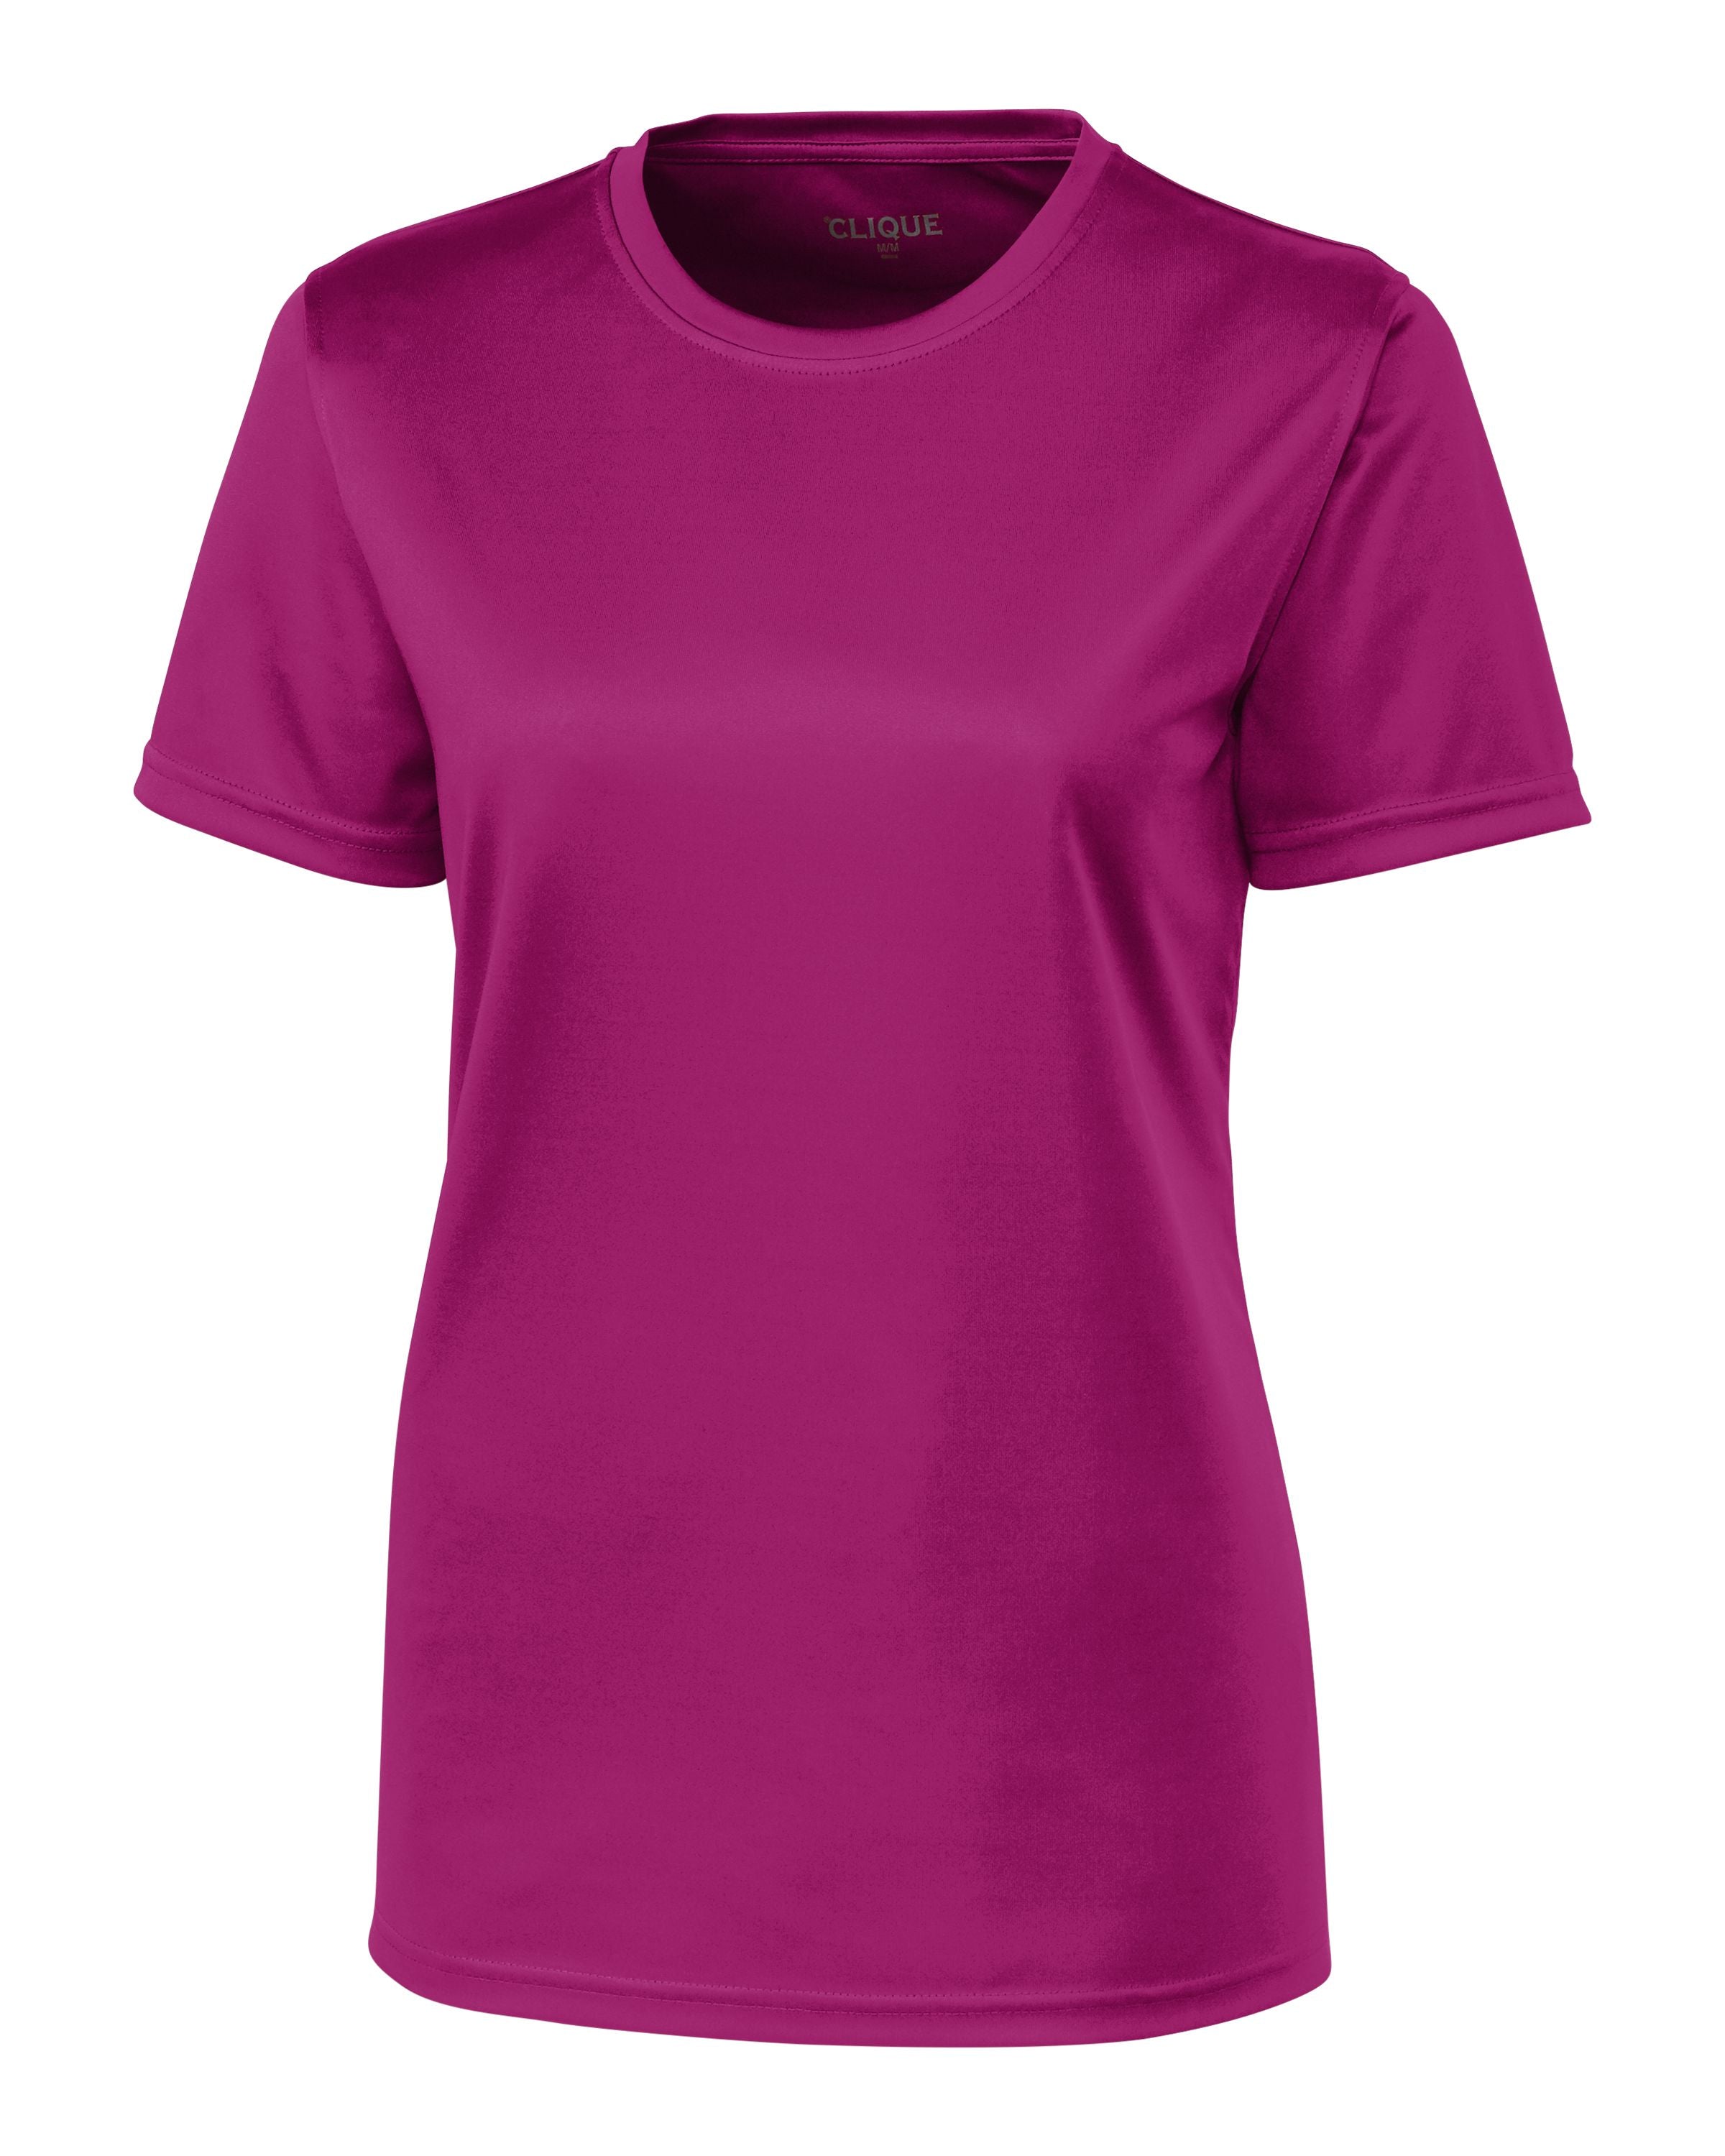 Clique Spin Jersey Tee Womens